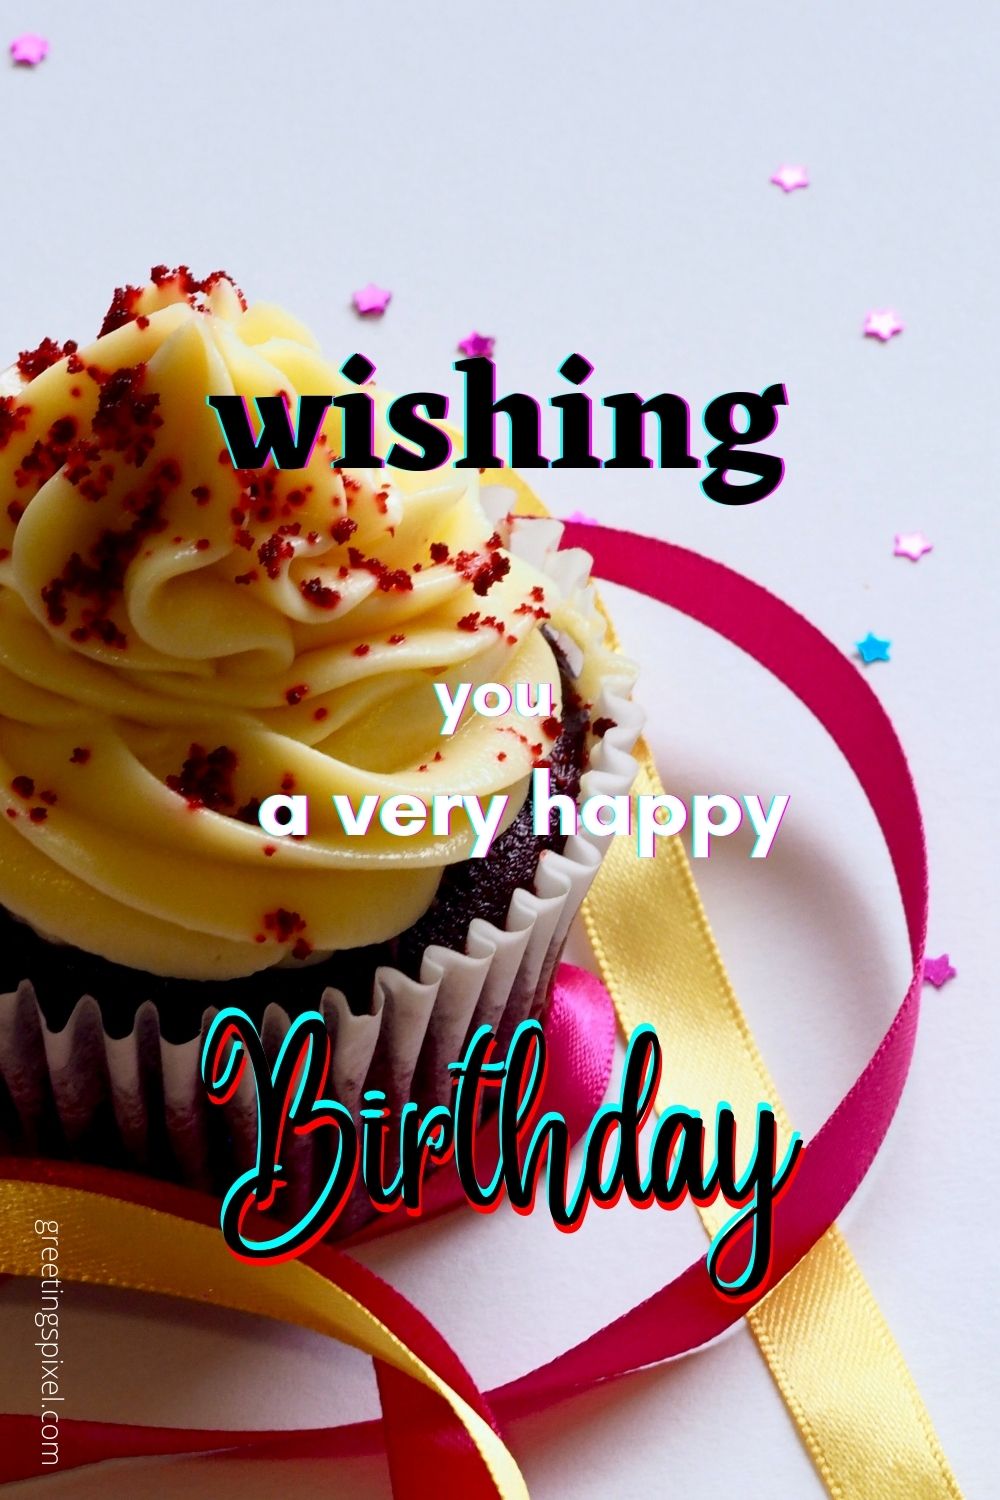 happy birthday images for her free download